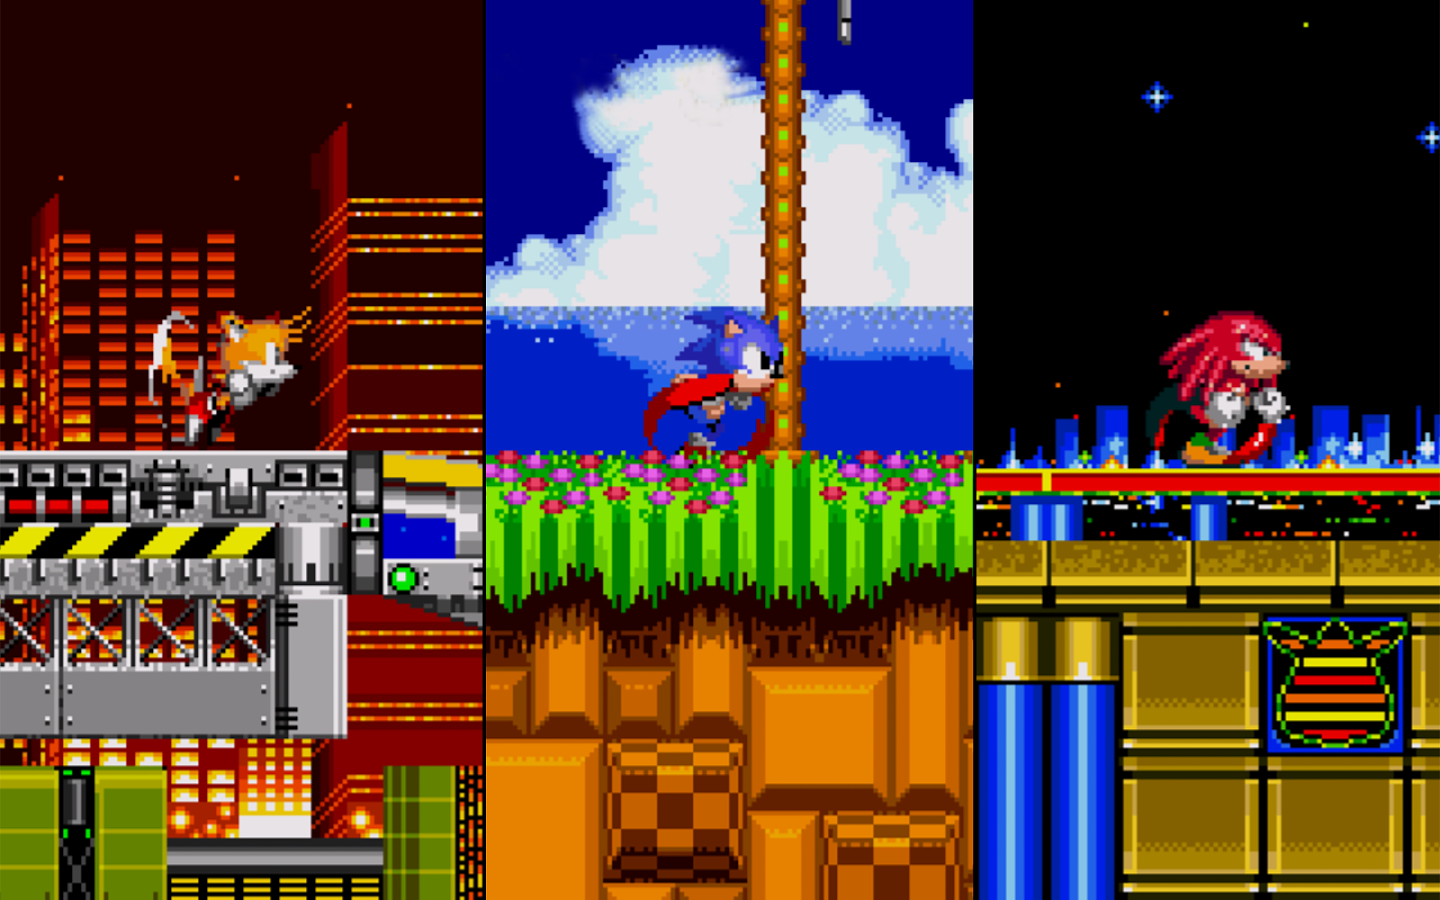 Sonic The Hedgehog 2 Classic Apk Download for Android- Latest version 1.8.2-  com.sega.sonic2.runner